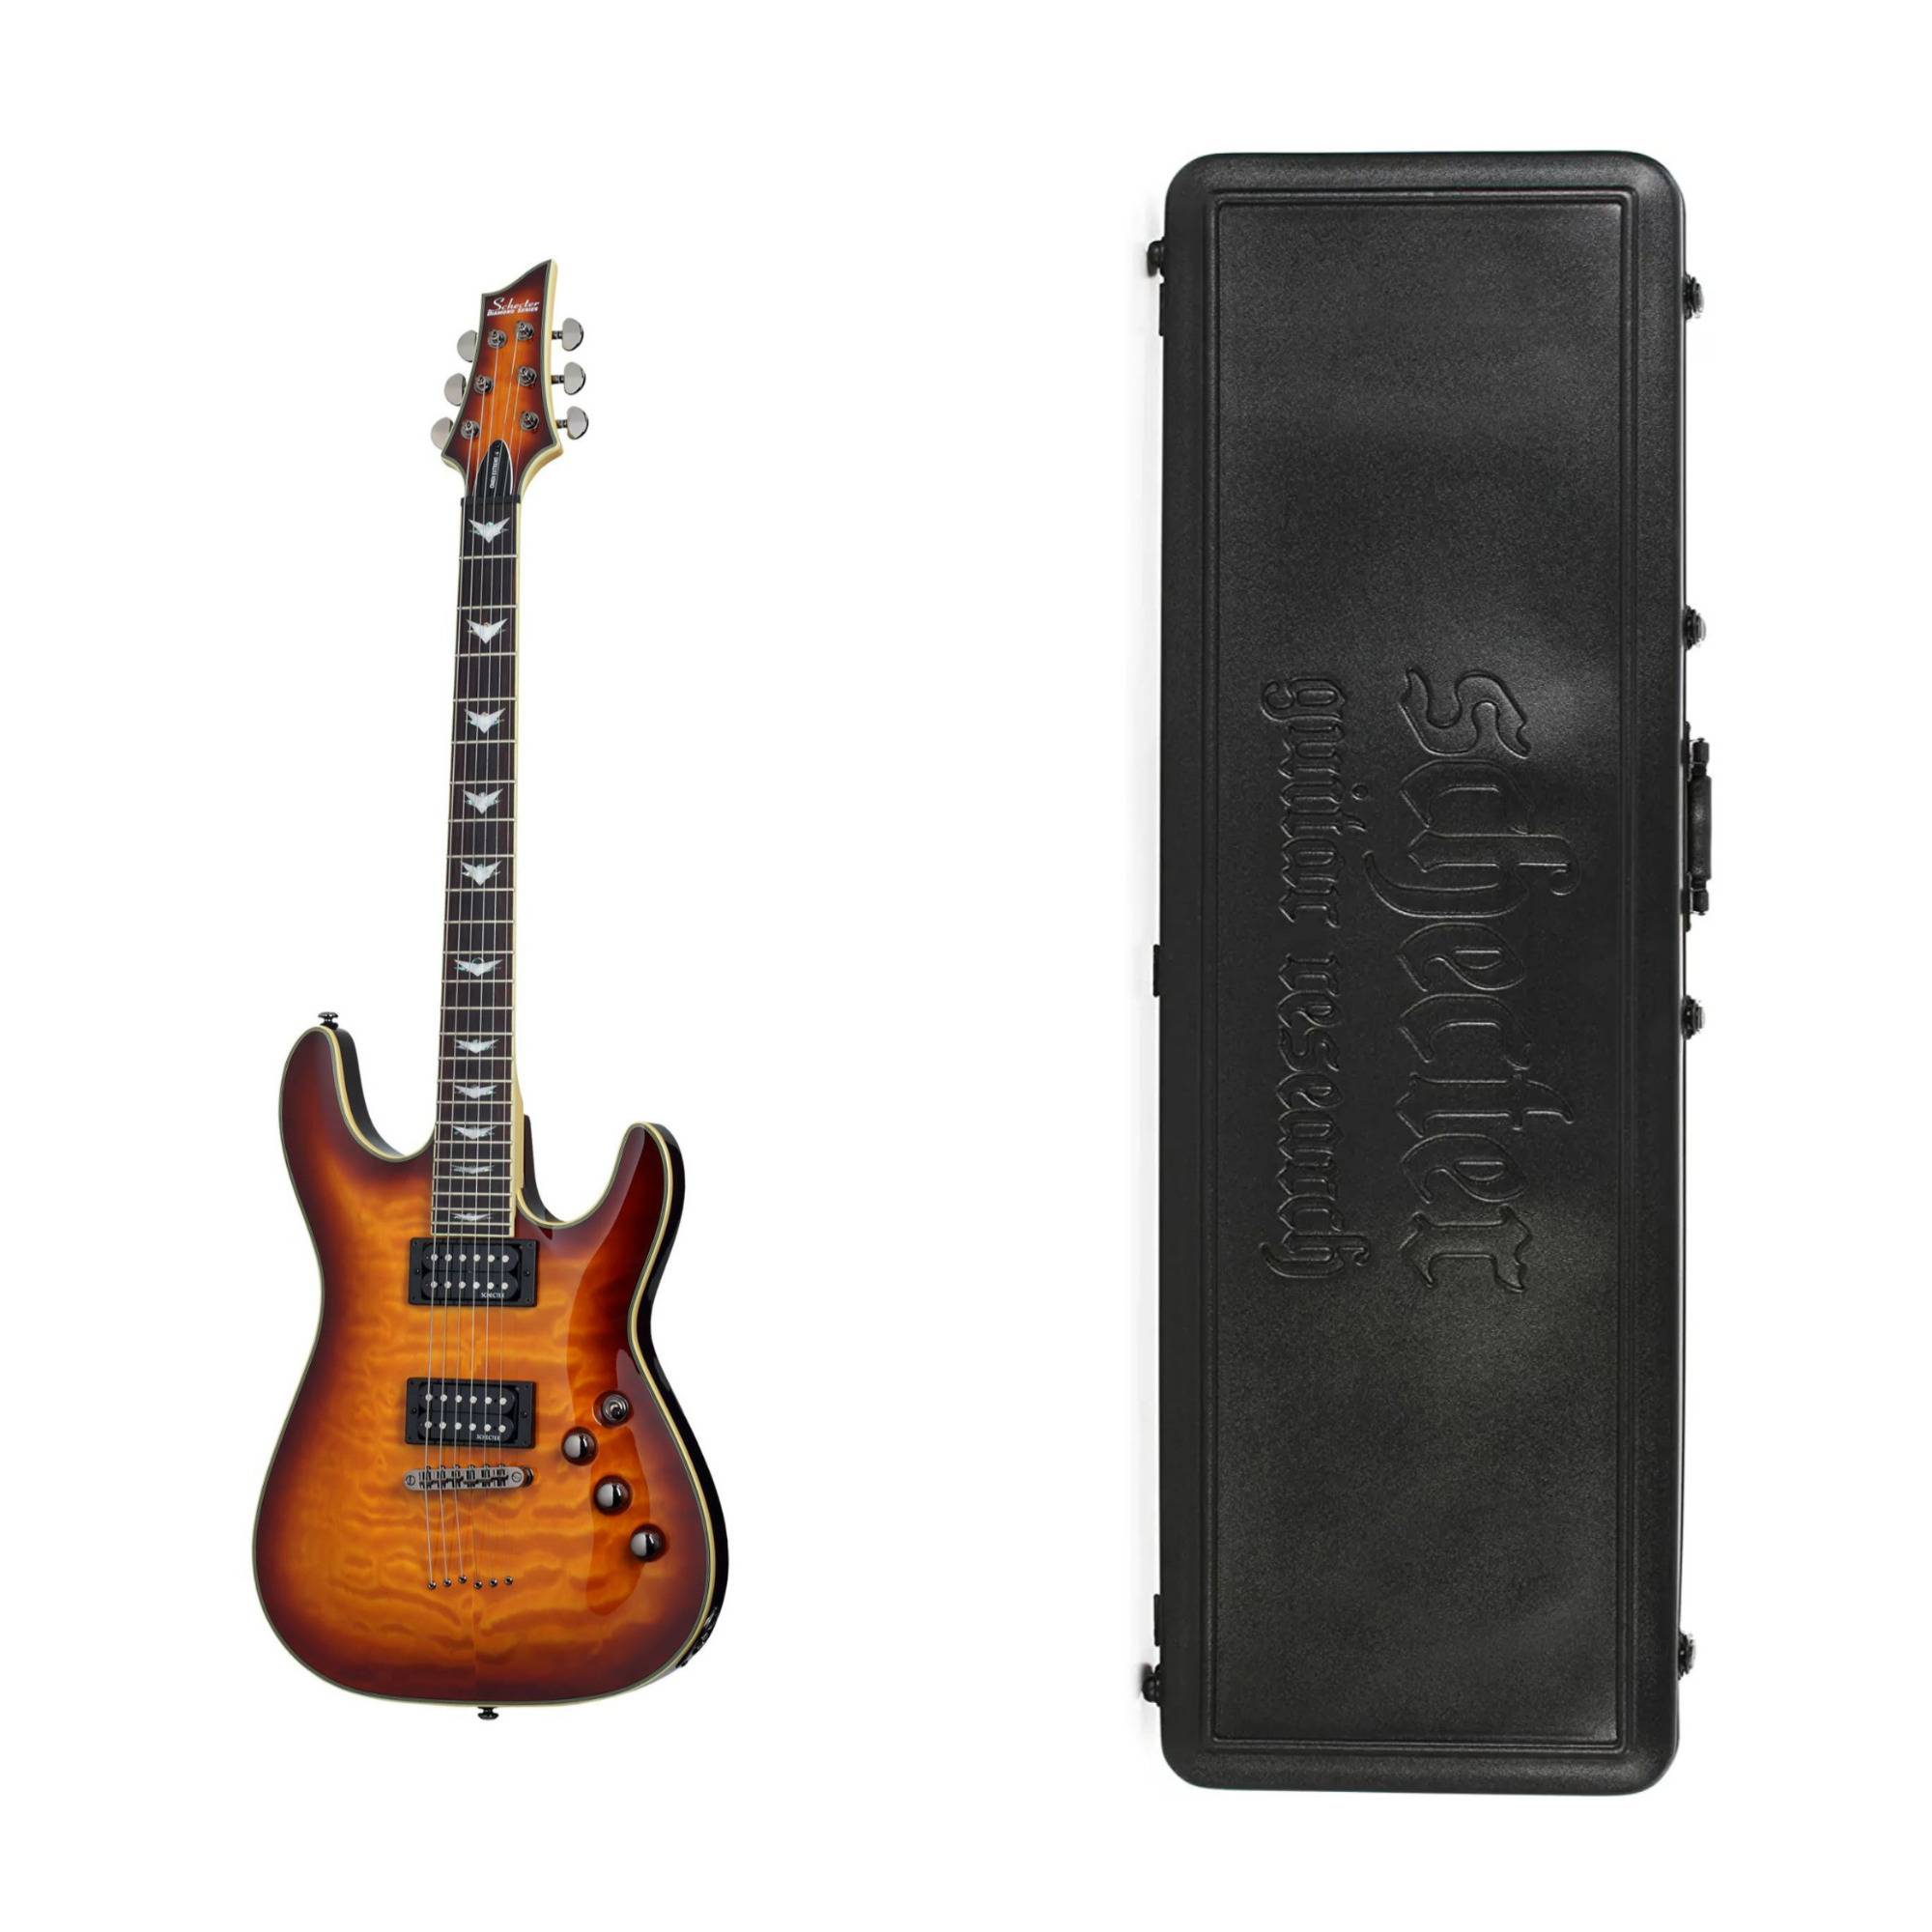 Schecter Omen Extreme 6-String Electric Guitar in Sunburst with Schecter Hard Shell Carrying Case